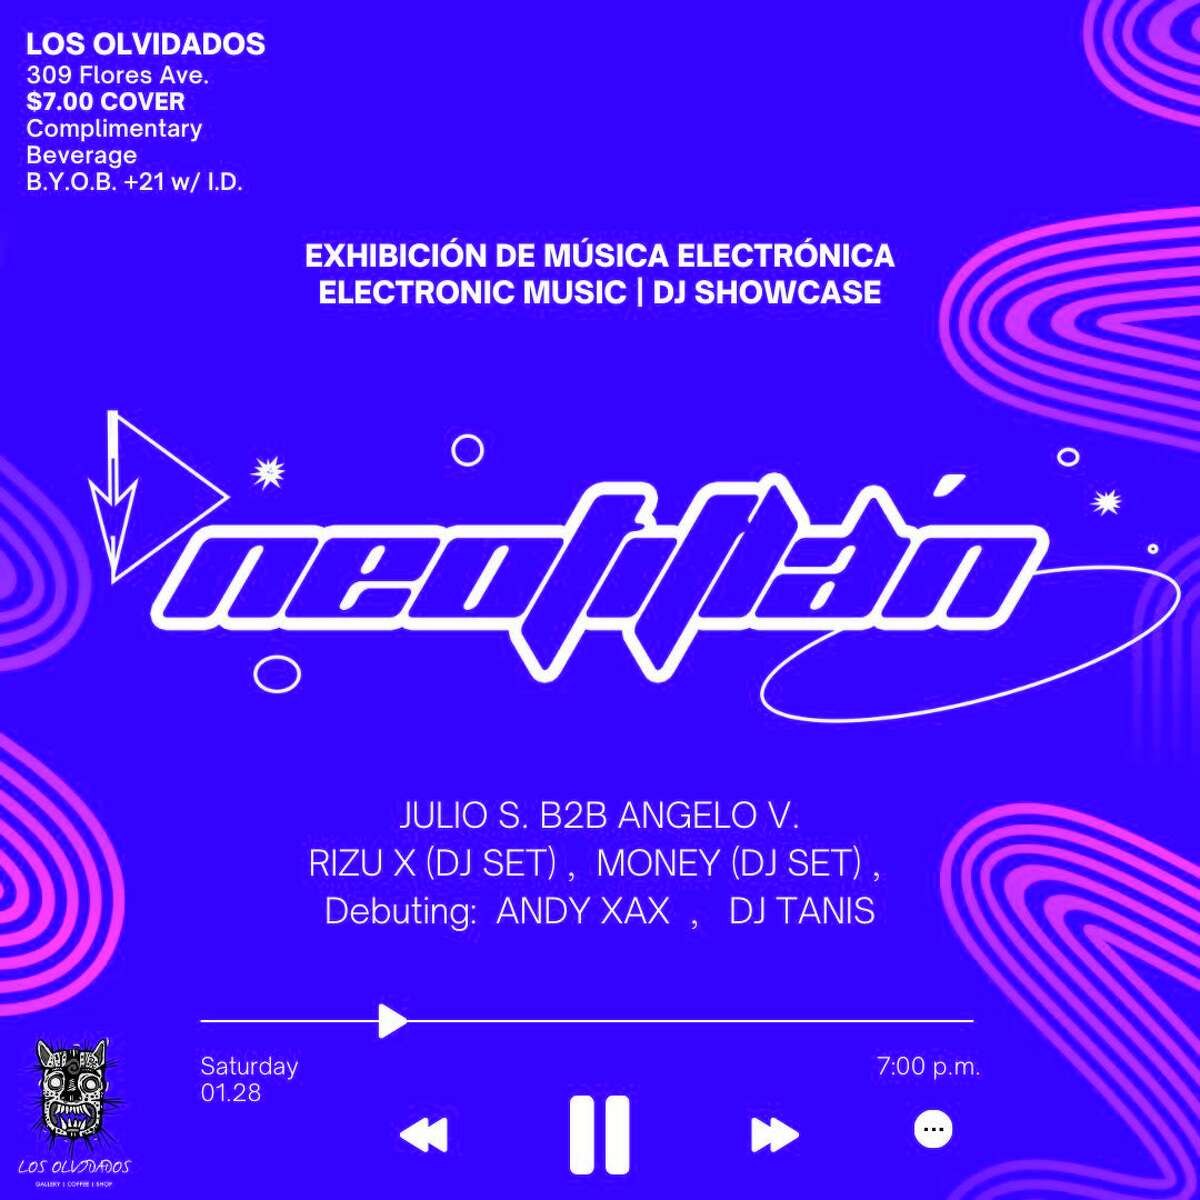 Los Olividados will be the center of Laredo's electronic music scene Saturday night, as the downtown venue hosts electronic music showcase NEOTITLÁN.